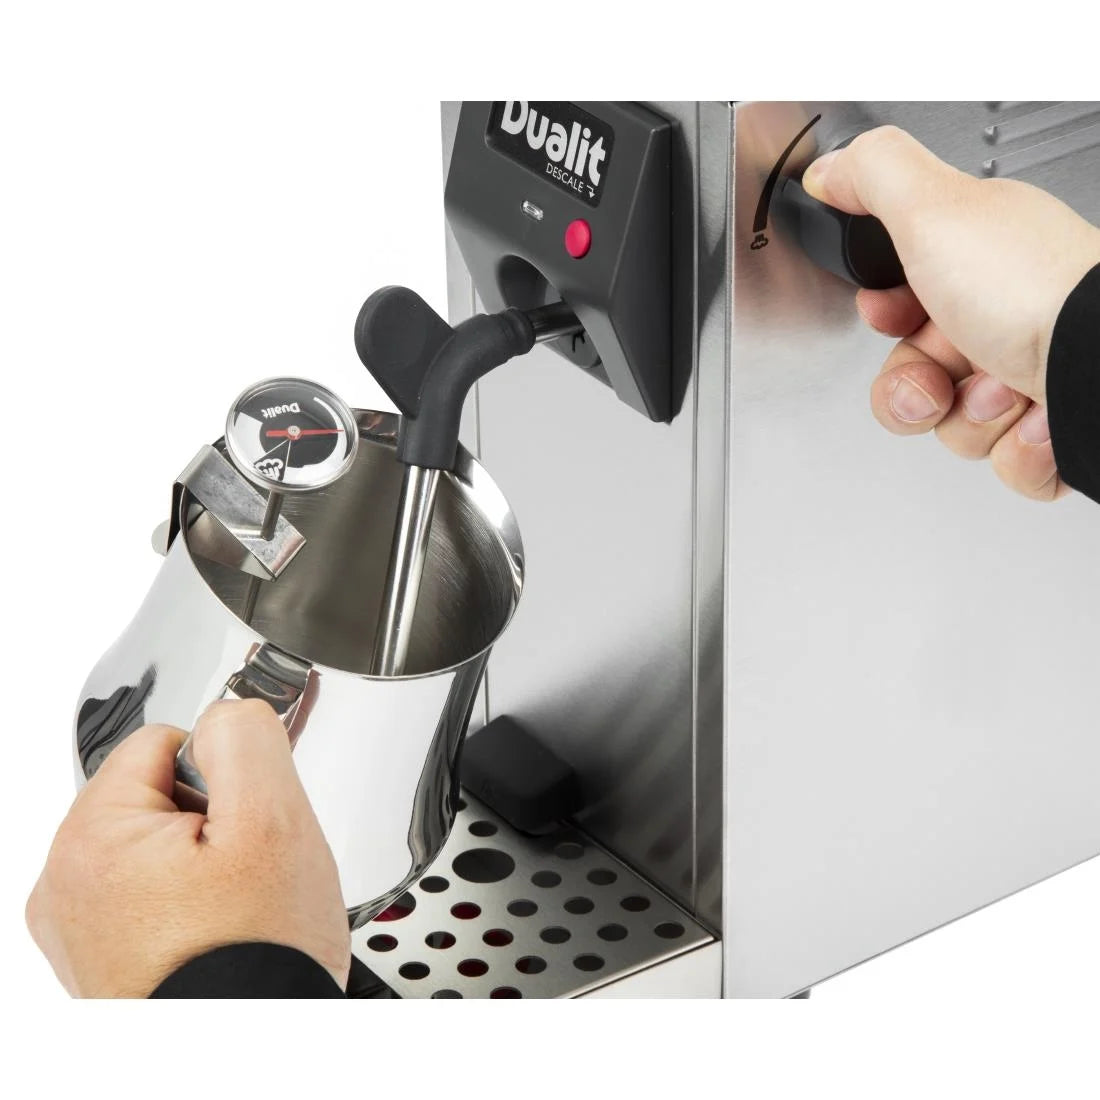 Dualit Black Hot-Cold Milk Frother